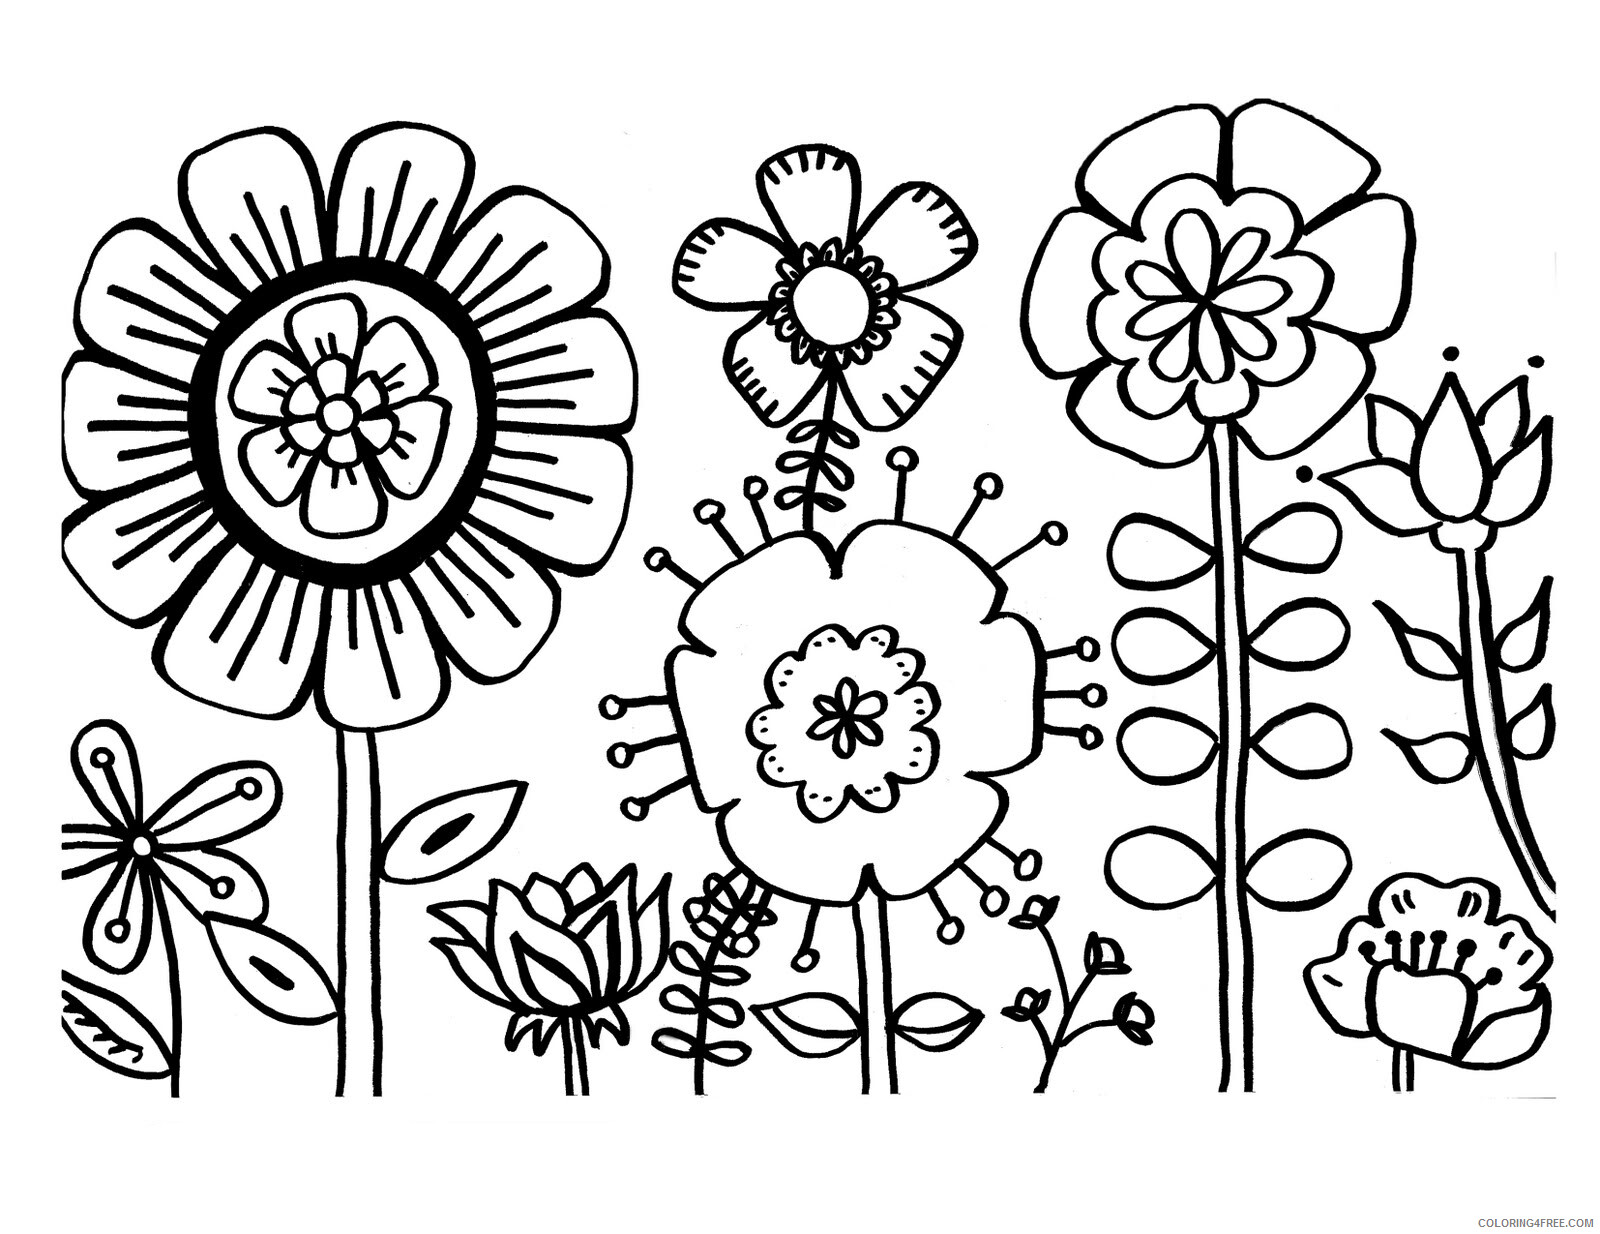 Printable Flower Coloring Pages Flowers Nature flowers to colour Printable 2021 Coloring4free